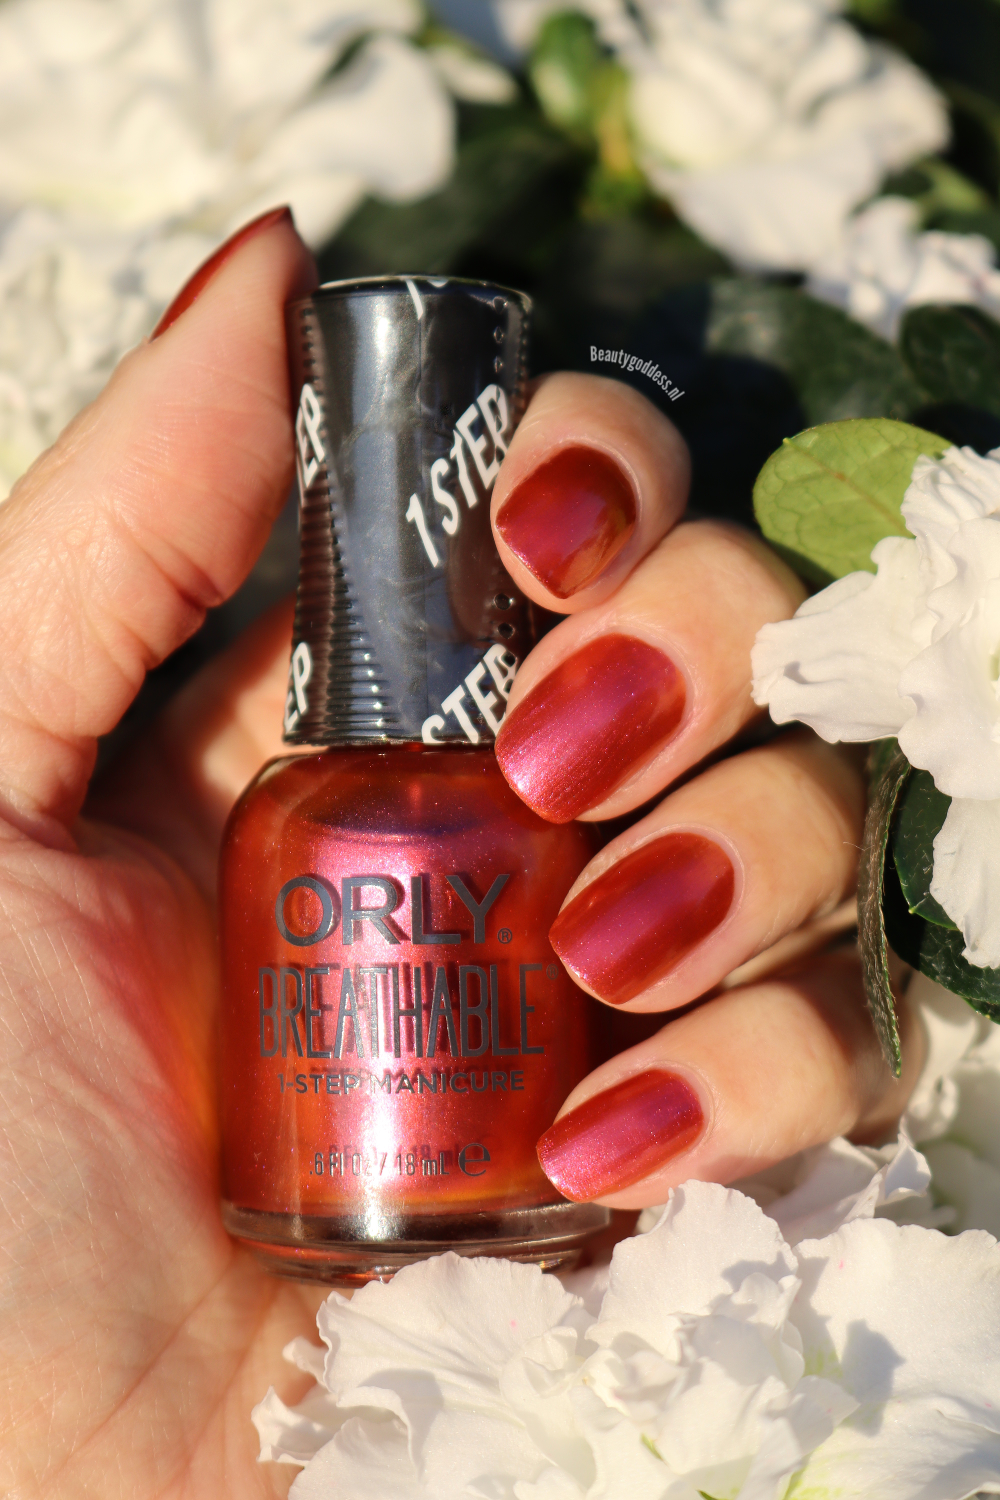 ORLY Breathable over the topaz